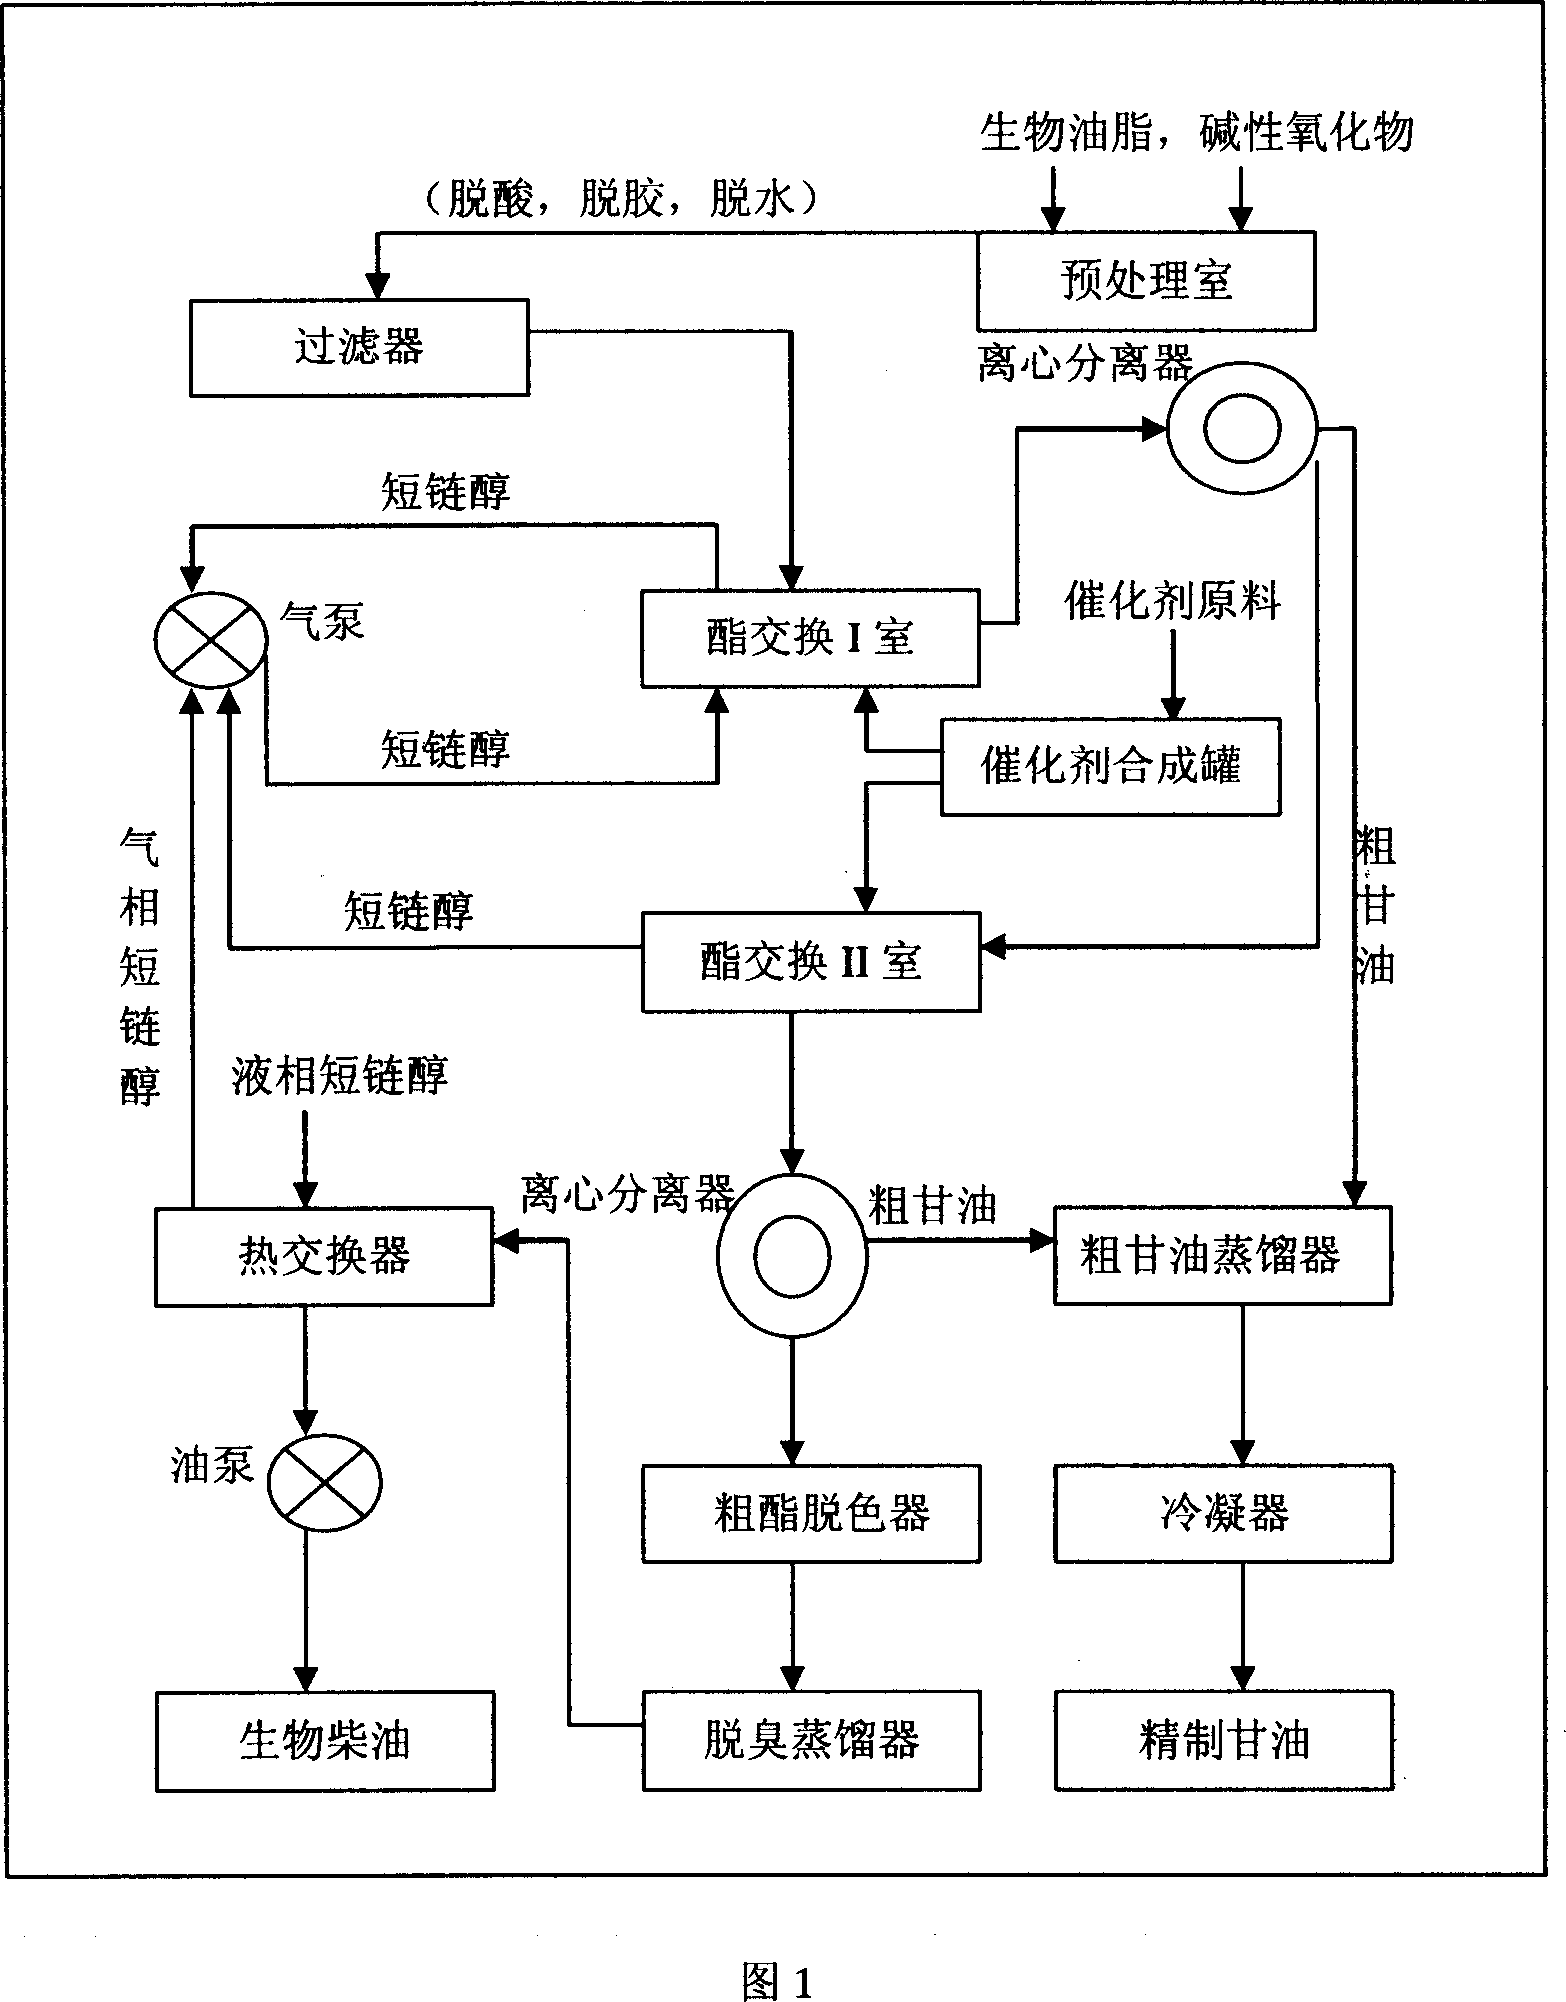 Low energy consumption production method of biological diesel oil